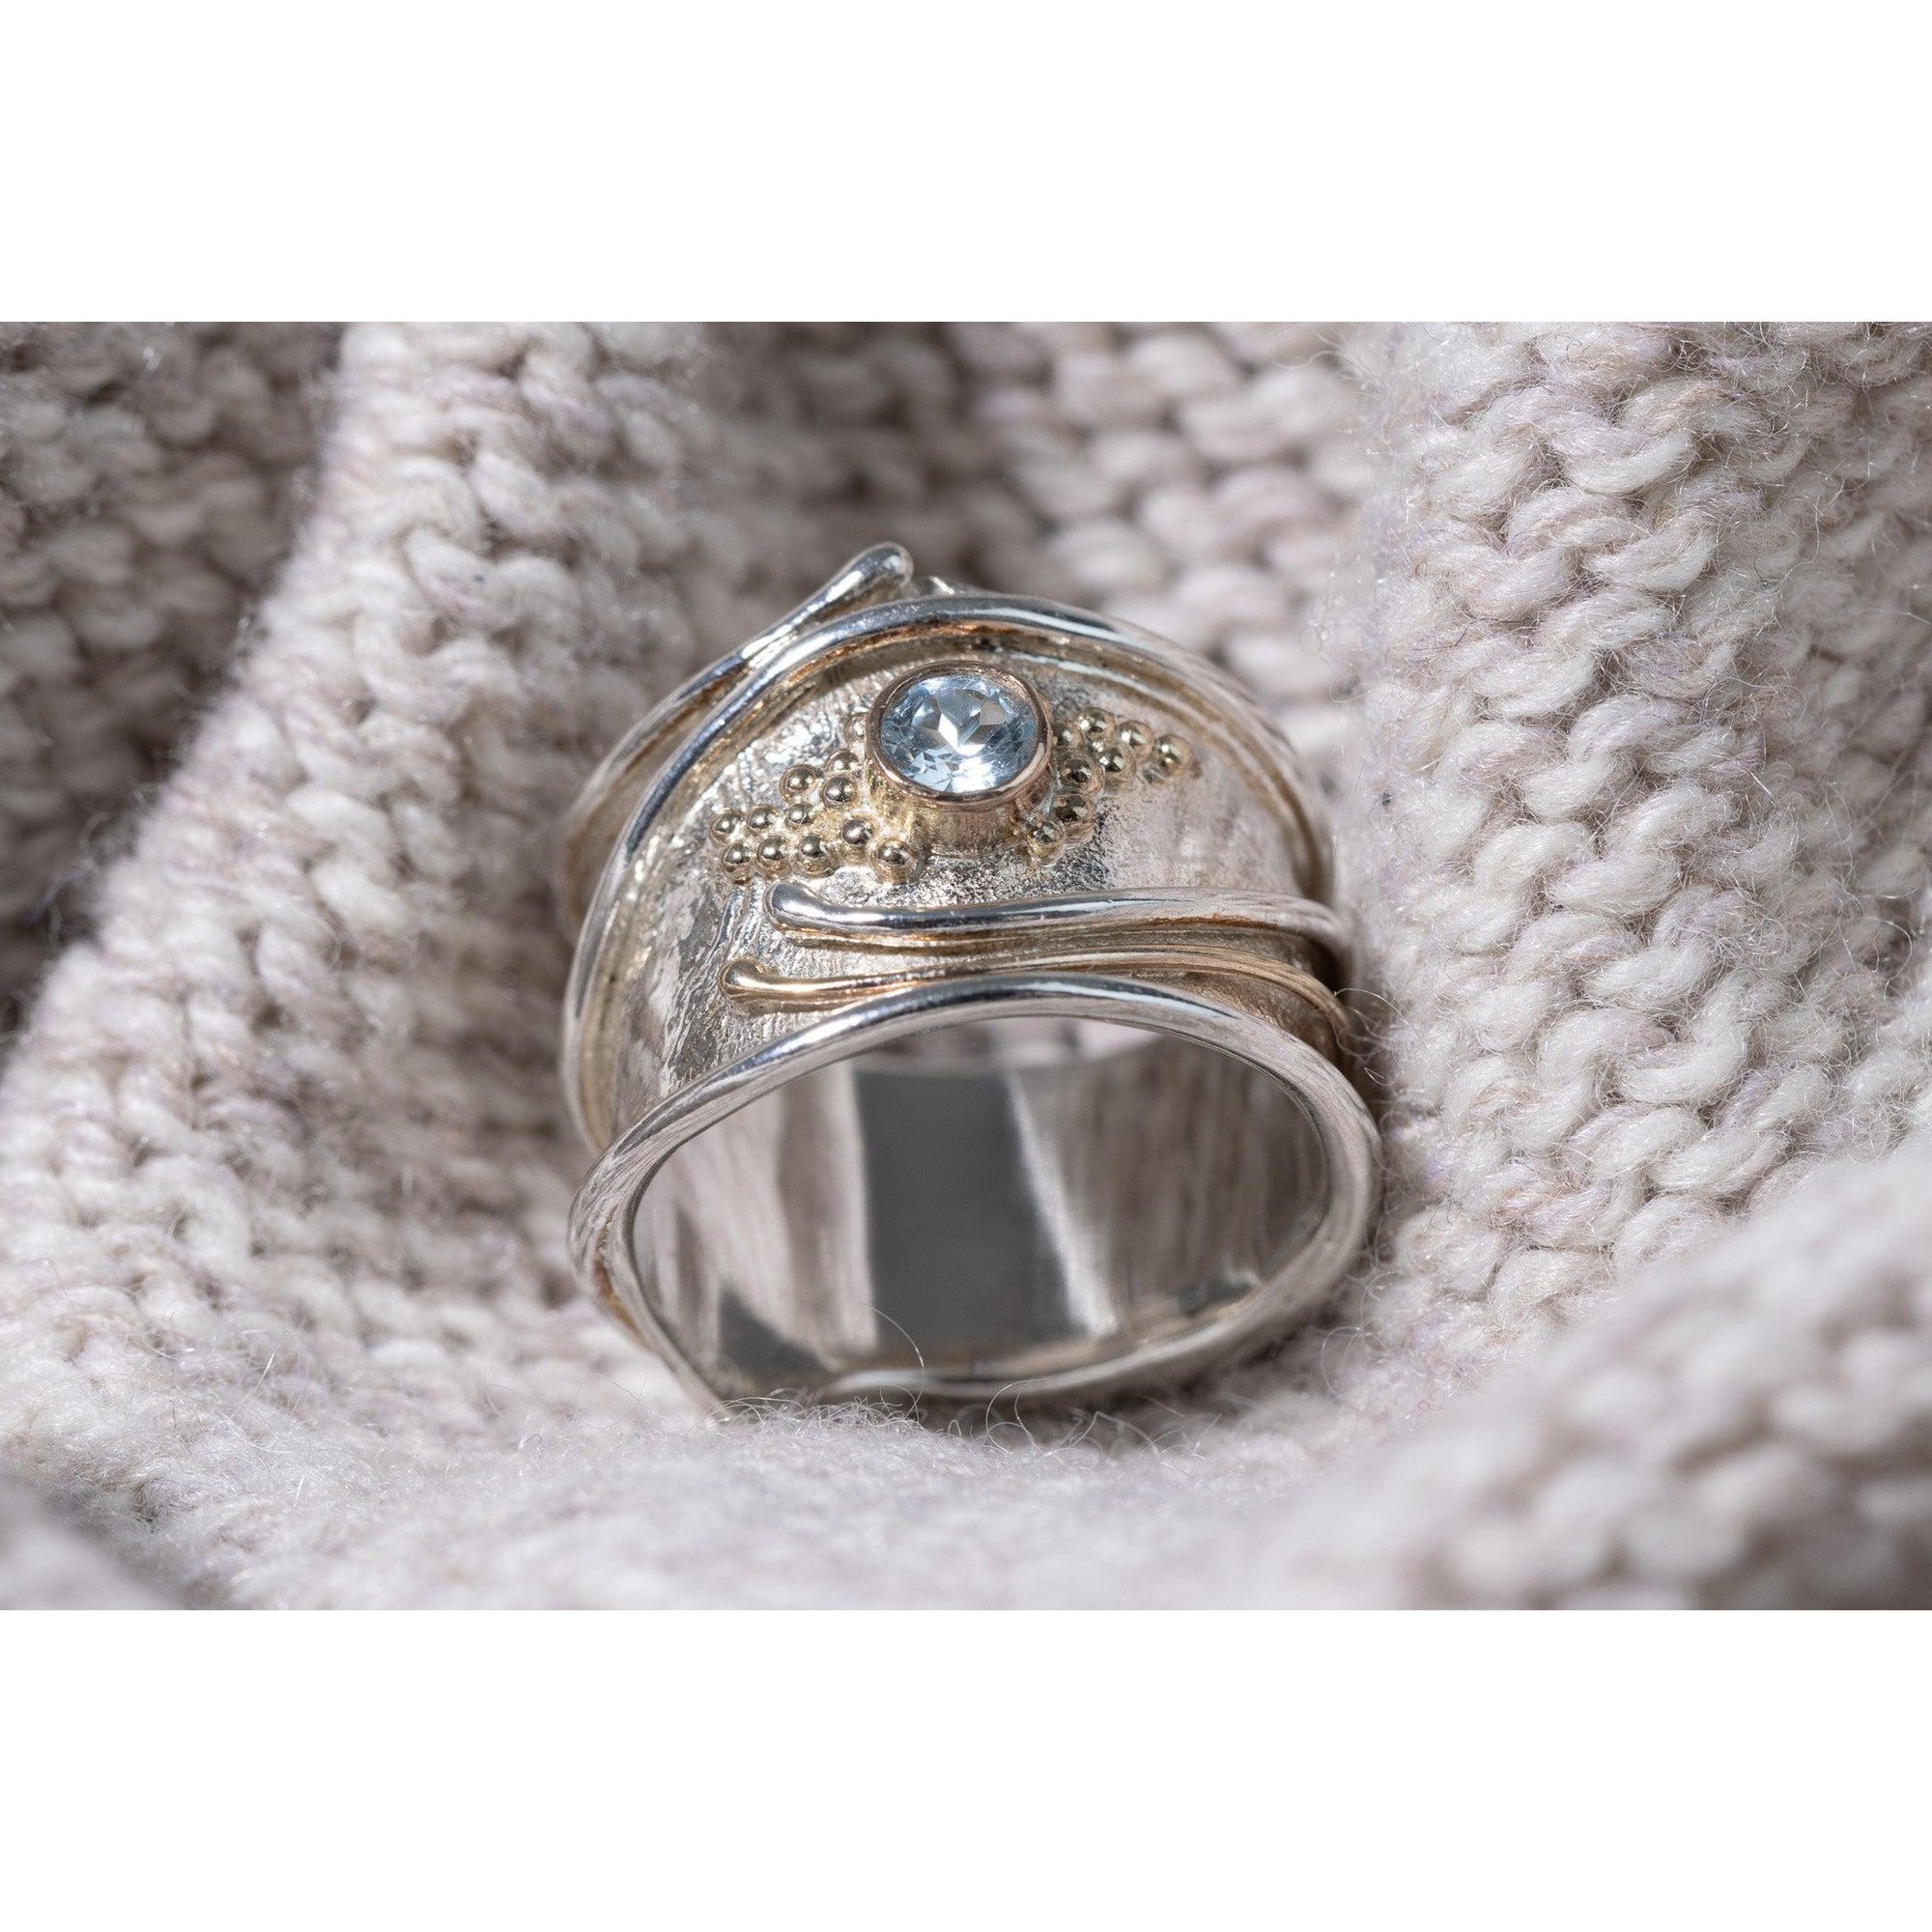 'LG61 - Wide Silver Ring with 9ct Gold 4mm Topaz Ring ' by Les Grimshaw, available at Padstow Gallery, Cornwall